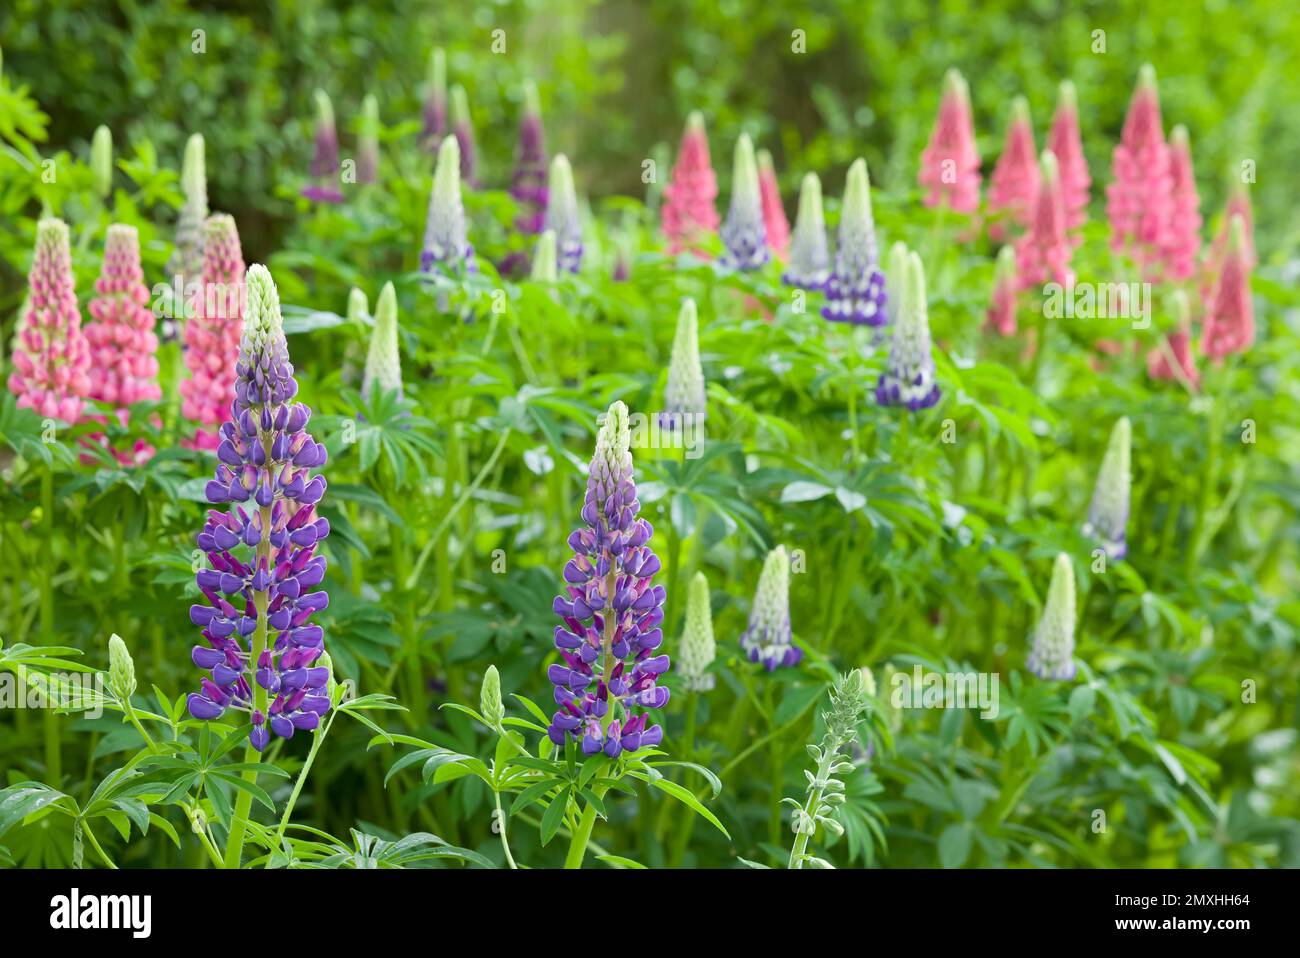 Lupin flowers, lupinus plants with pink and purple flowers in a UK back garden Stock Photo